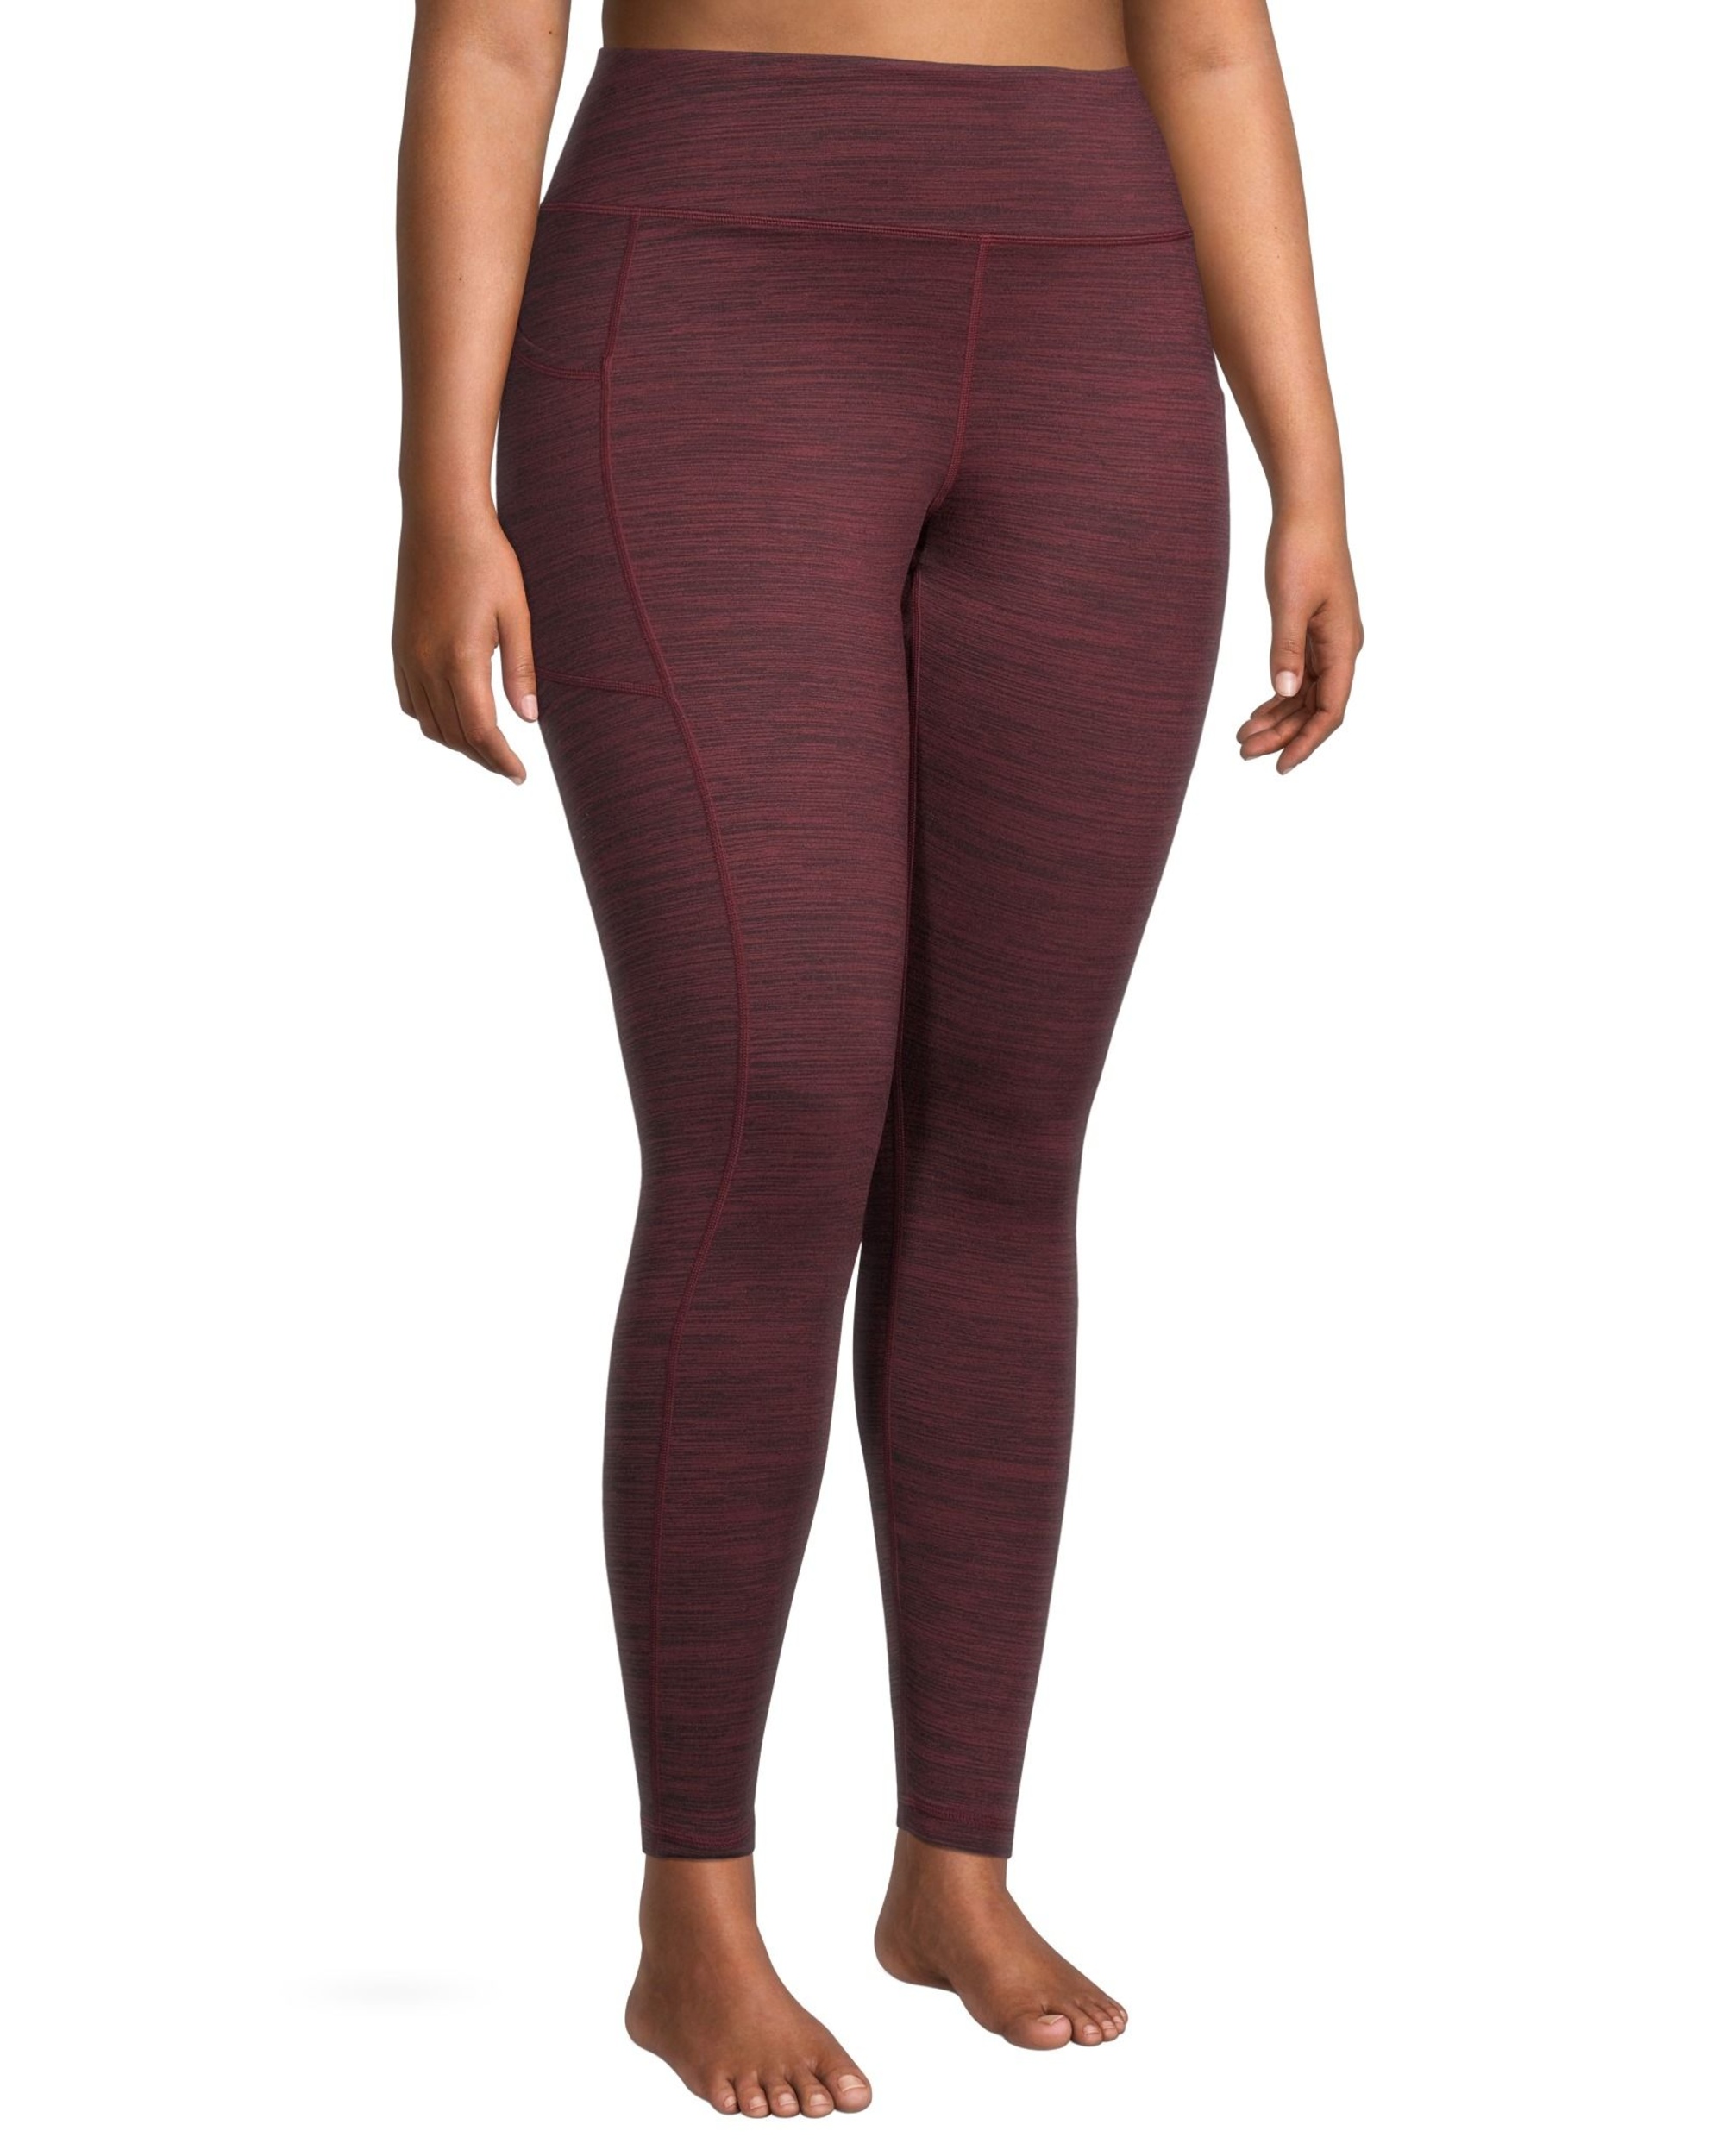 Shambhala Women's High Rise Live-In Warmth Brushed Leggings with Side ...